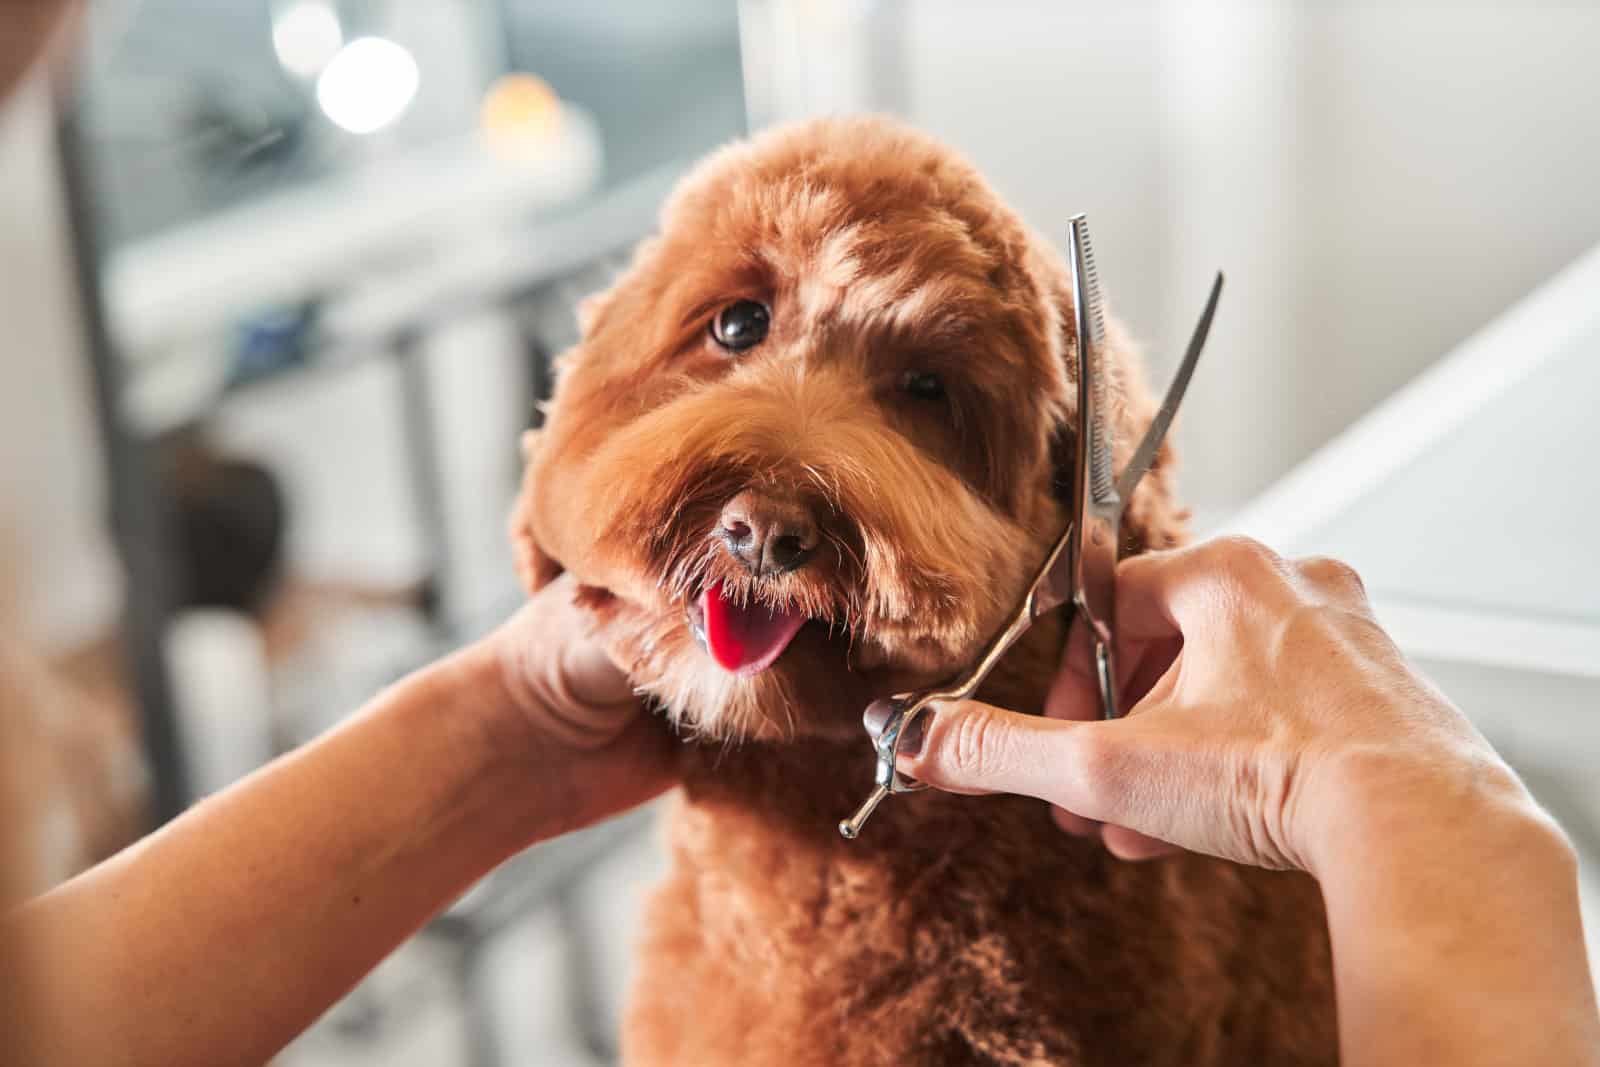 Professional groomer cut fur with scissors and clipper at the little smile dog labradoodle